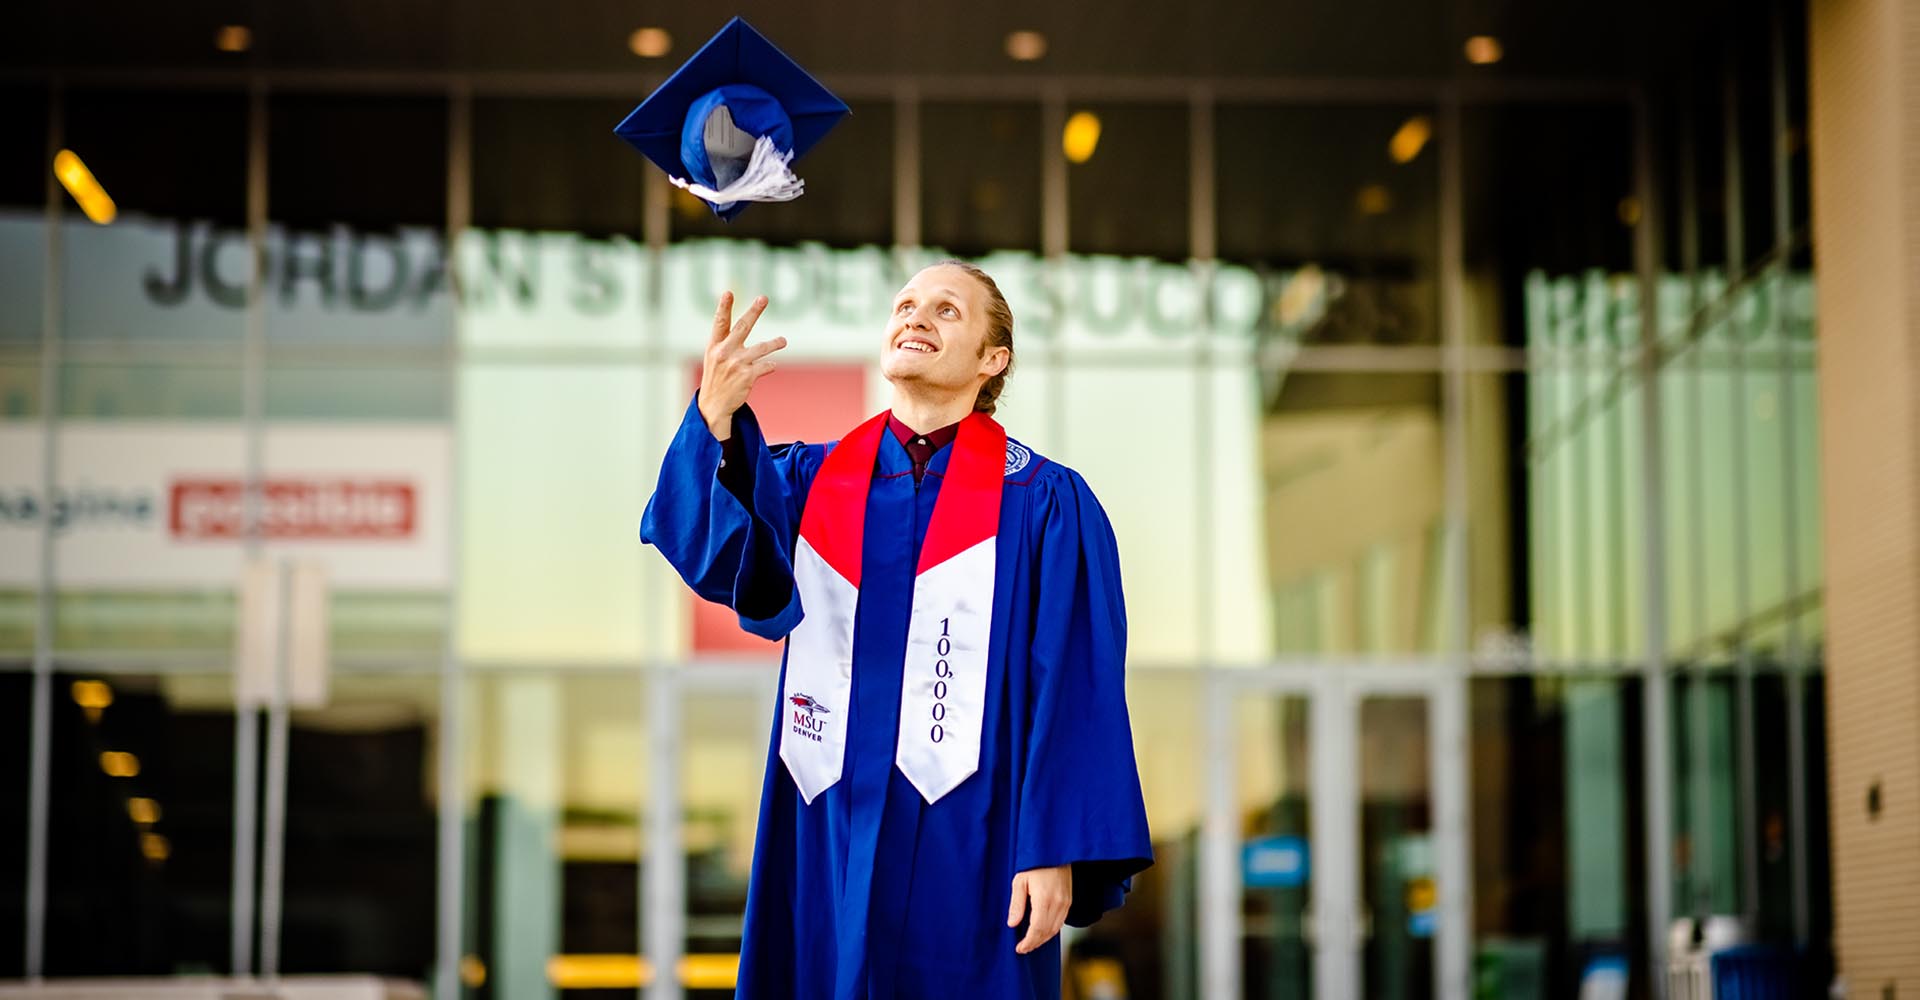 Photo of Branden Ingersoll with cap and gown